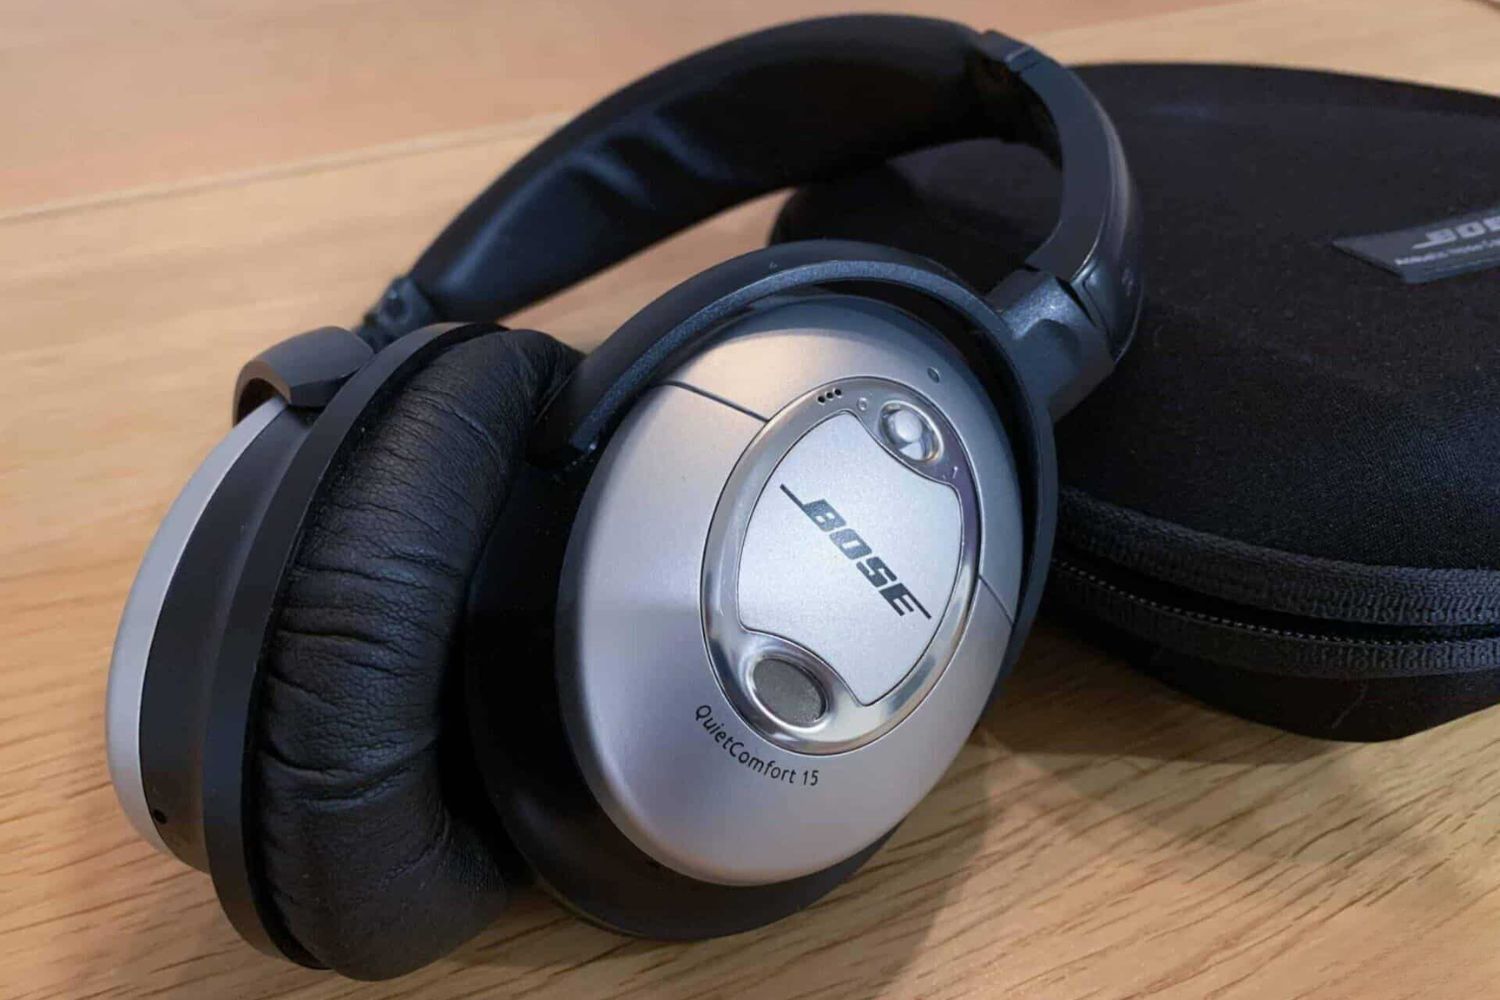 How To Use Bose Quiet 15 Noise Cancelling Headphones